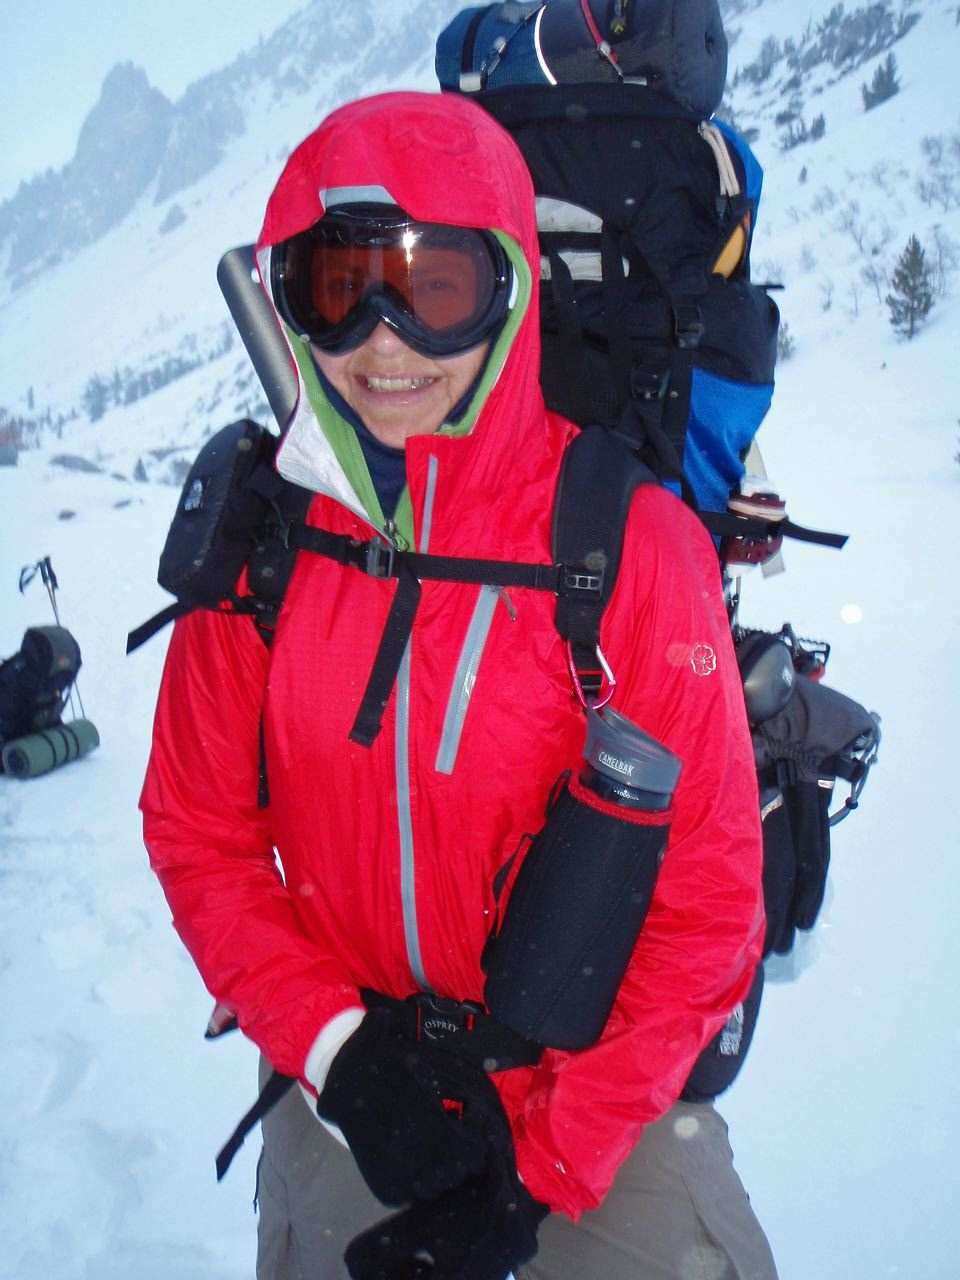 Backpacking while snowing